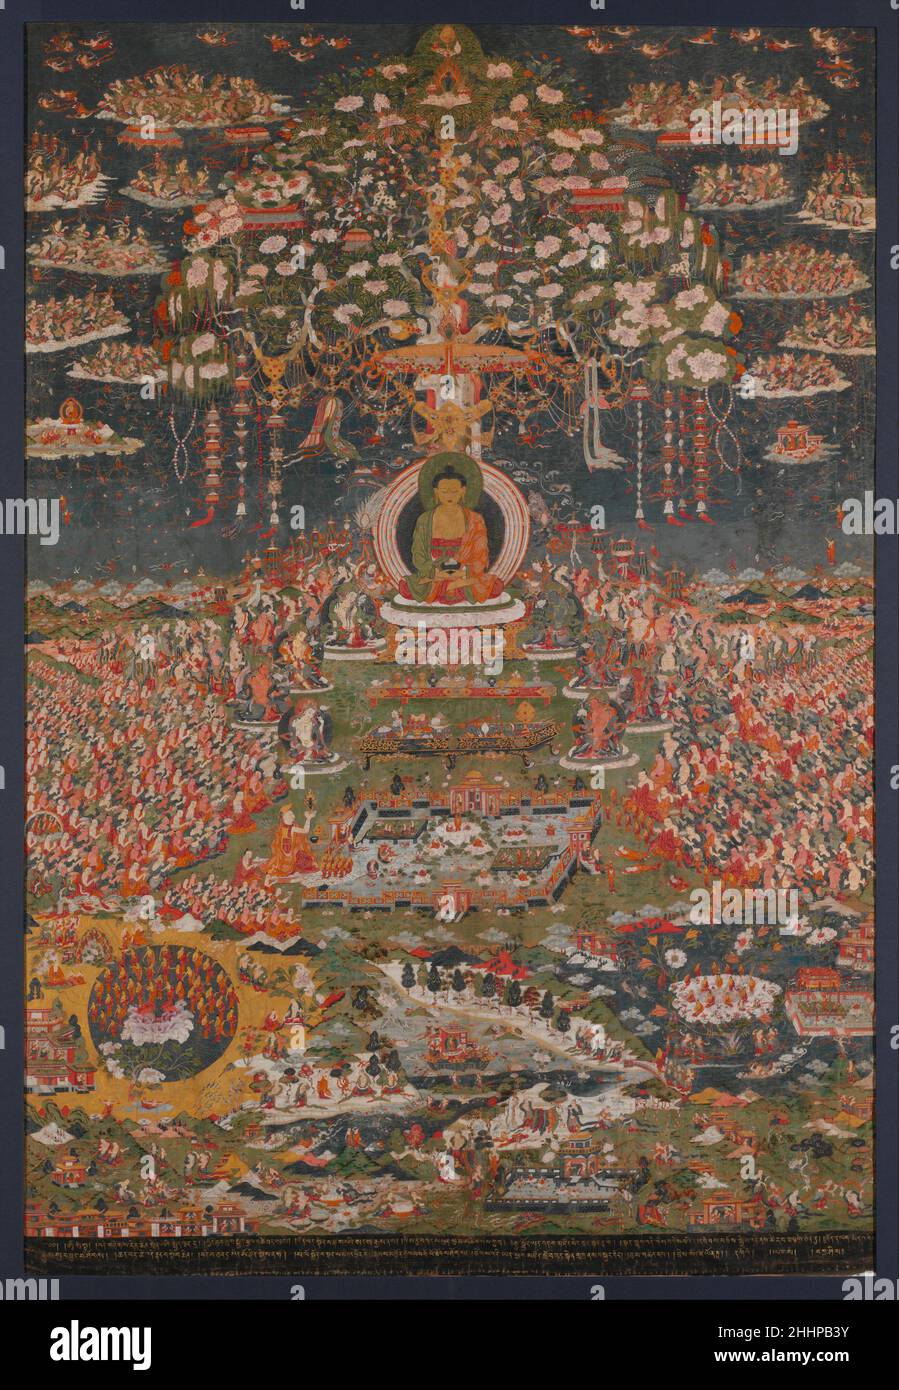 Amitabha, the Buddha of the Western Pure Land (Sukhavati) ca. 1700 Central Tibet Amitayus, the Buddha of Eternal Life, is also known as Amitabha, one of the five Cosmic Buddhas of Esoteric Buddhism. He is shown in his paradise, Sukhavati, the Western Pure Land, enthroned beneath a flowering tree festooned with strands of jewels and auspicious symbols. To either side the sky is filled with throngs of ecstatic demigods who bear offerings and scatter flowers. Seated below are the eight great bodhisattvas, and between them are two large, low tables covered with offerings. To either side are the va Stock Photo